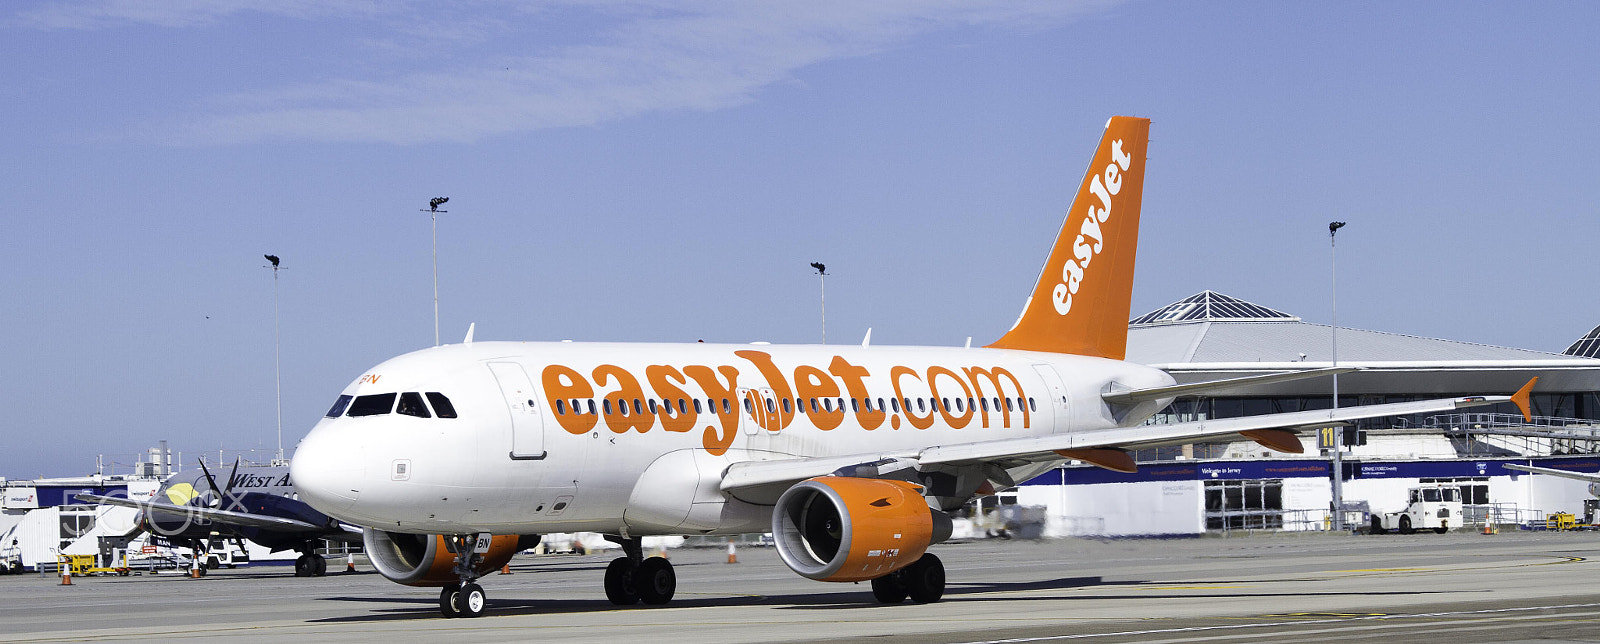 Canon EOS 7D + Tamron AF 28-300mm F3.5-6.3 XR Di LD Aspherical (IF) Macro sample photo. Easyjet - daily route to uk photography